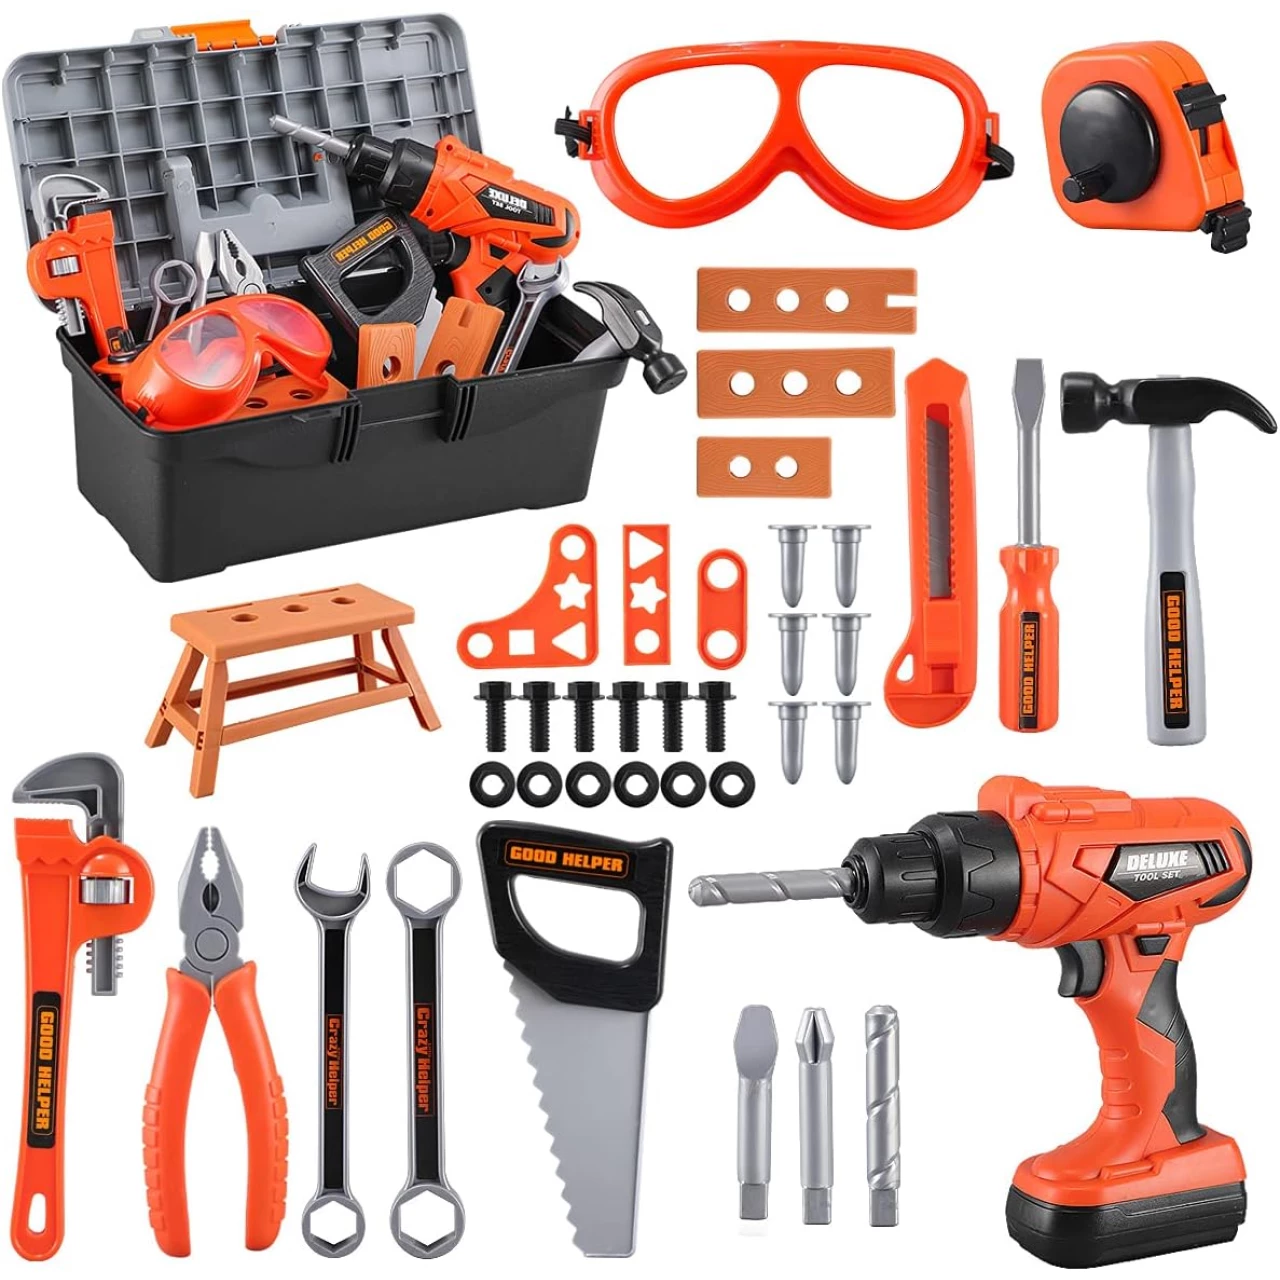 Kids Tool Set - Zealous 45 PCS Toddler Tool Set with Tool Box &amp; Electronic Toy Drill, Pretend Play Kids Toys, Toy Tools for Kids Ages 3,4,5,6,7,8 Years Old, Boy Toys